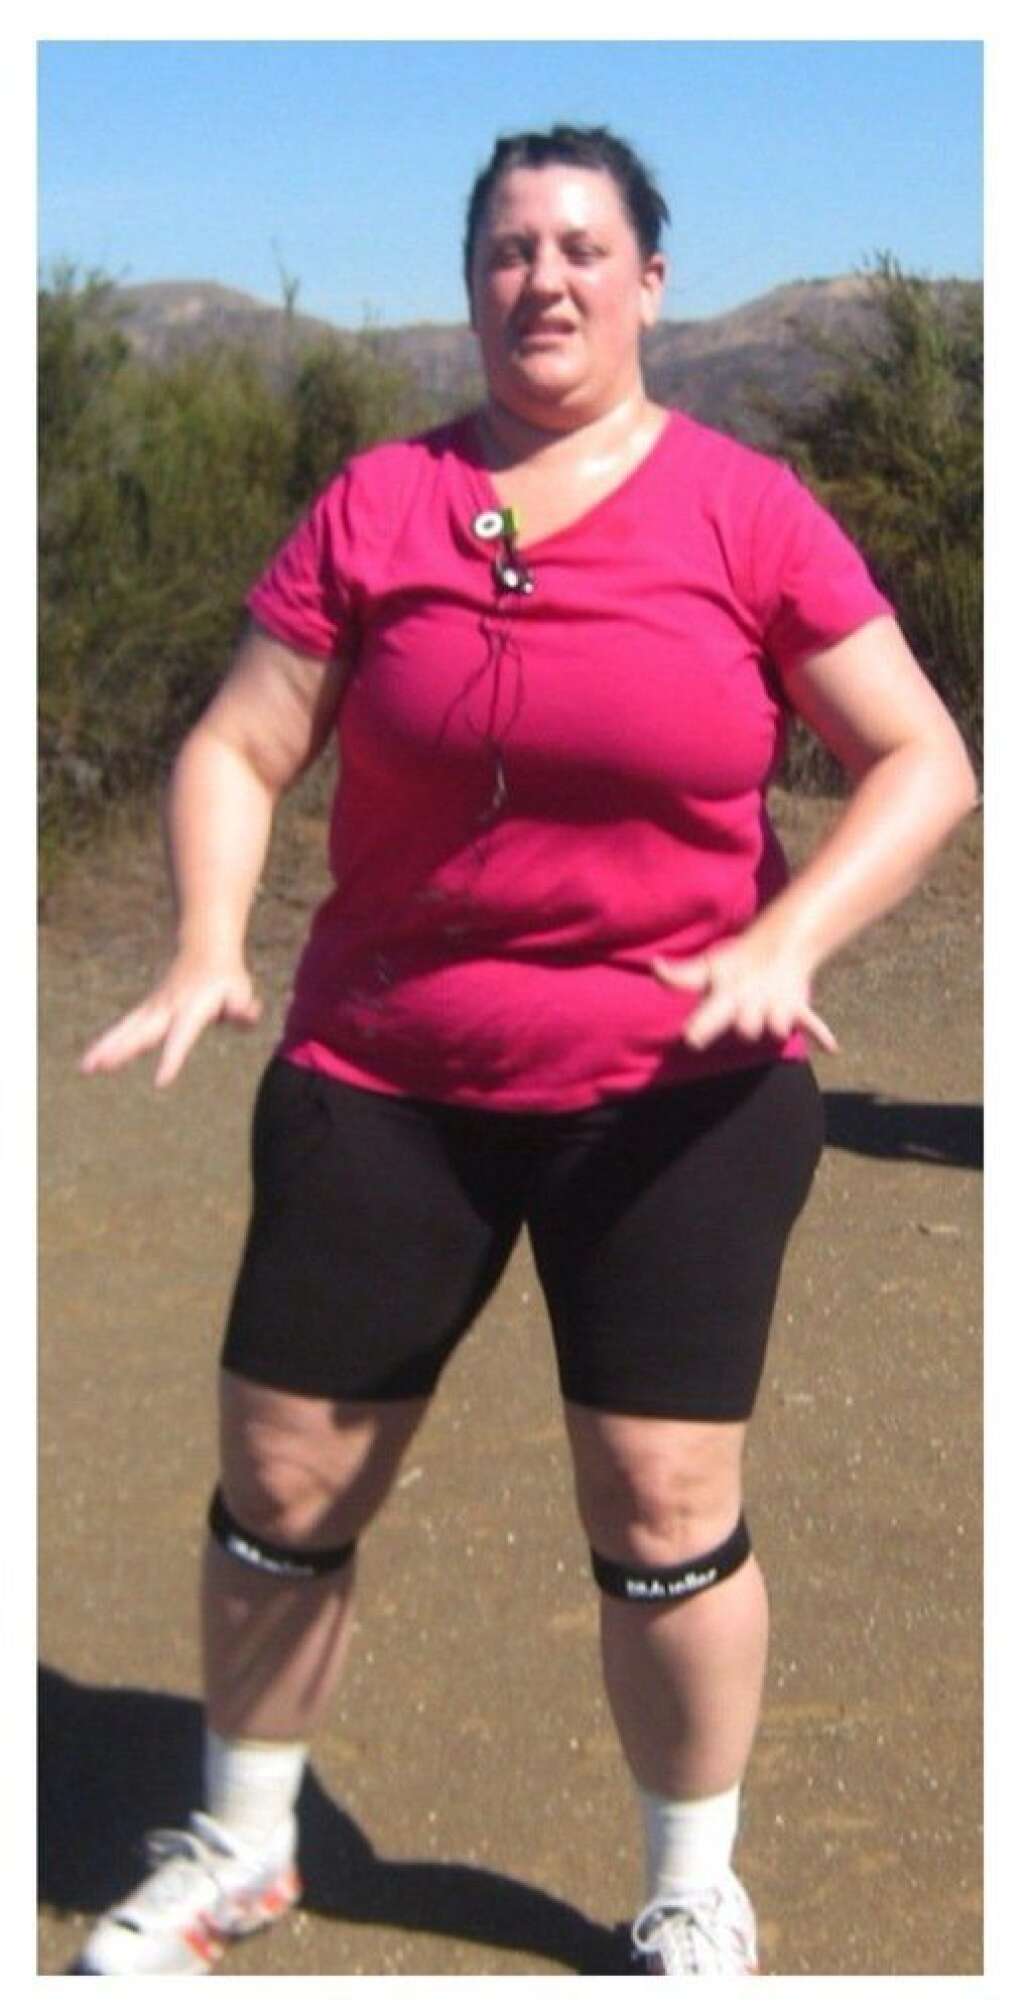 Olivia BEFORE - <a href="http://www.huffingtonpost.com/2013/01/07/i-lost-weight-biggest-loser-olivia-ward_n_2288394.html">Read Olivia's story here.</a>